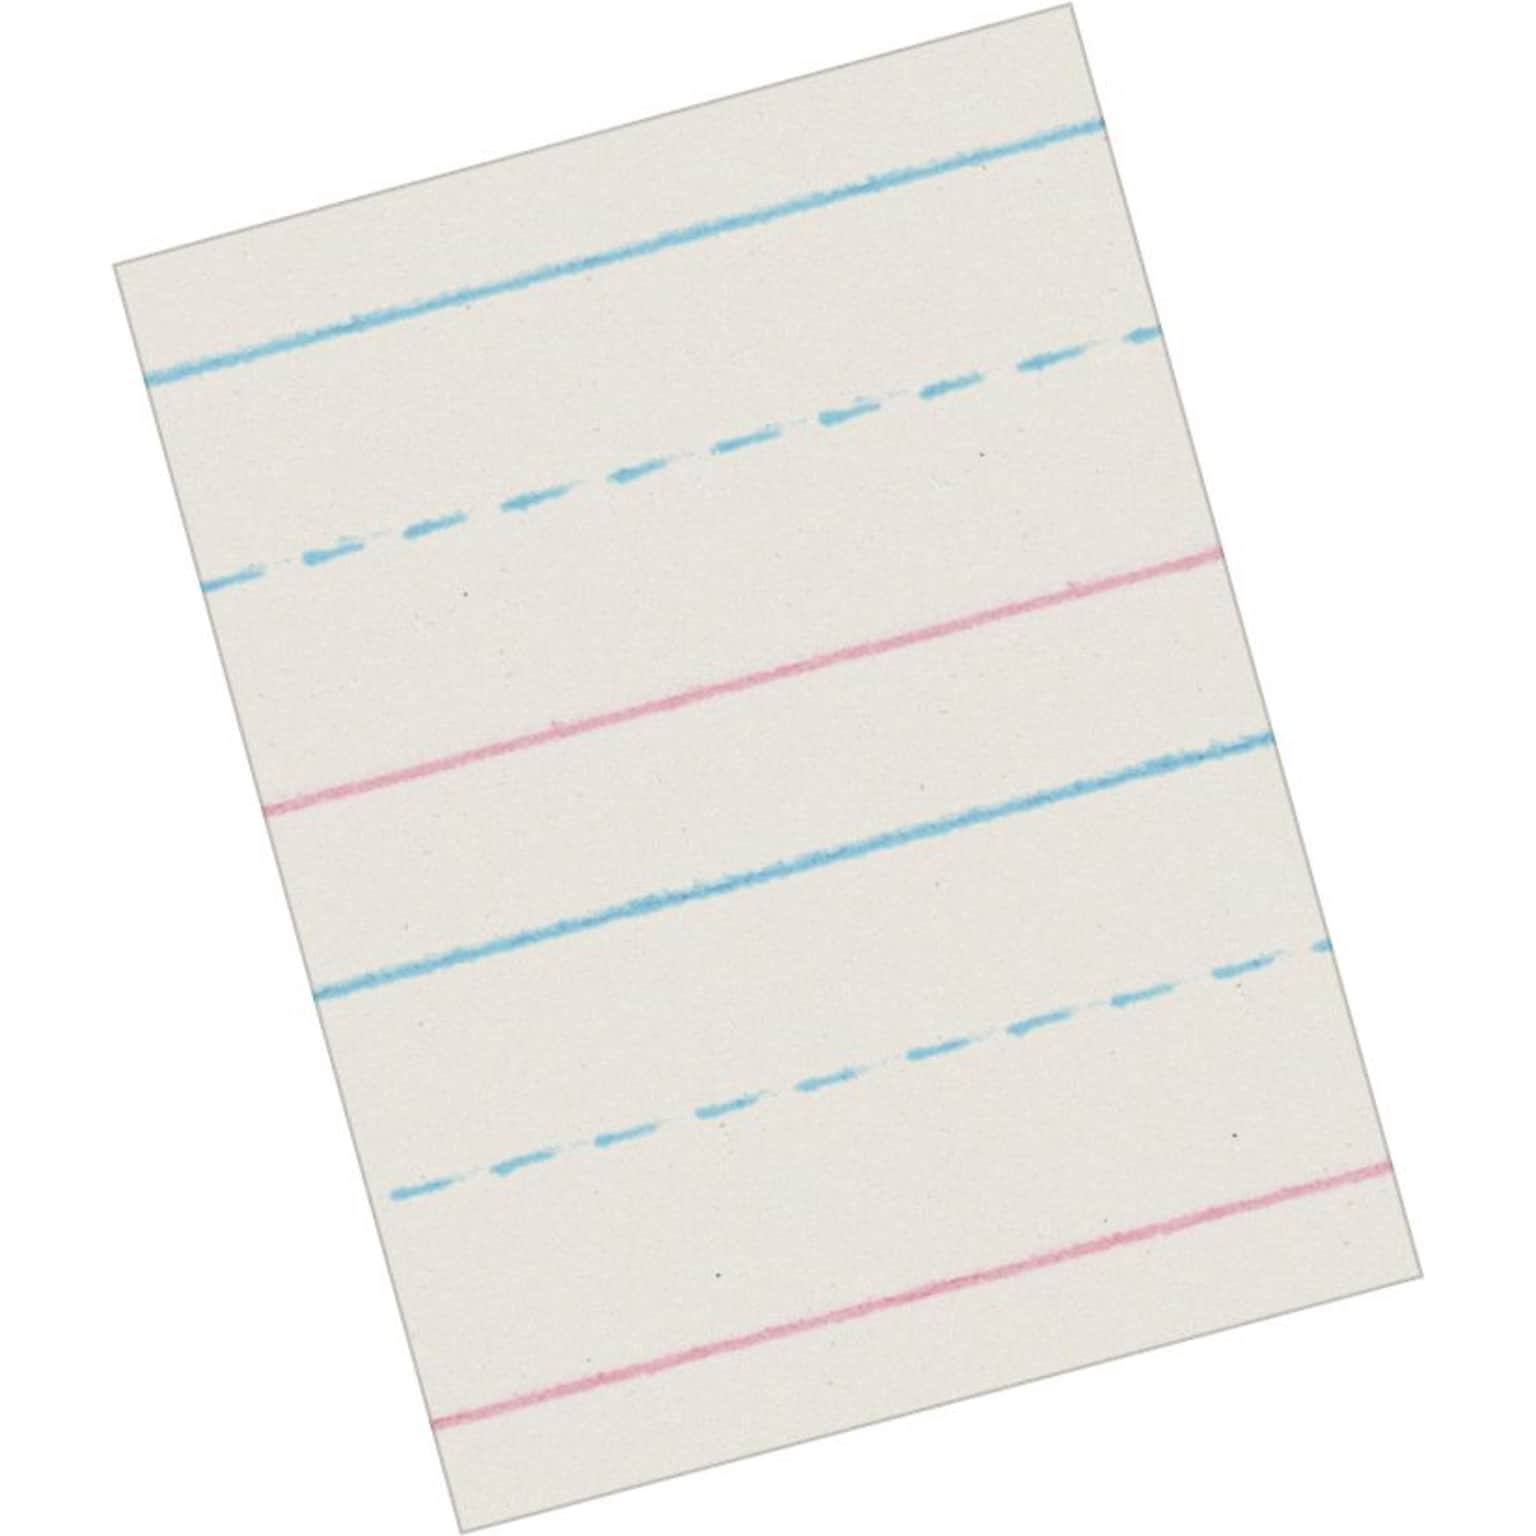 Pacon Zaner-Bloser Picture Story Paper, 12 x 18, 5/8 Ruled, White, 250 Sheets/Pack (PACZP2694)